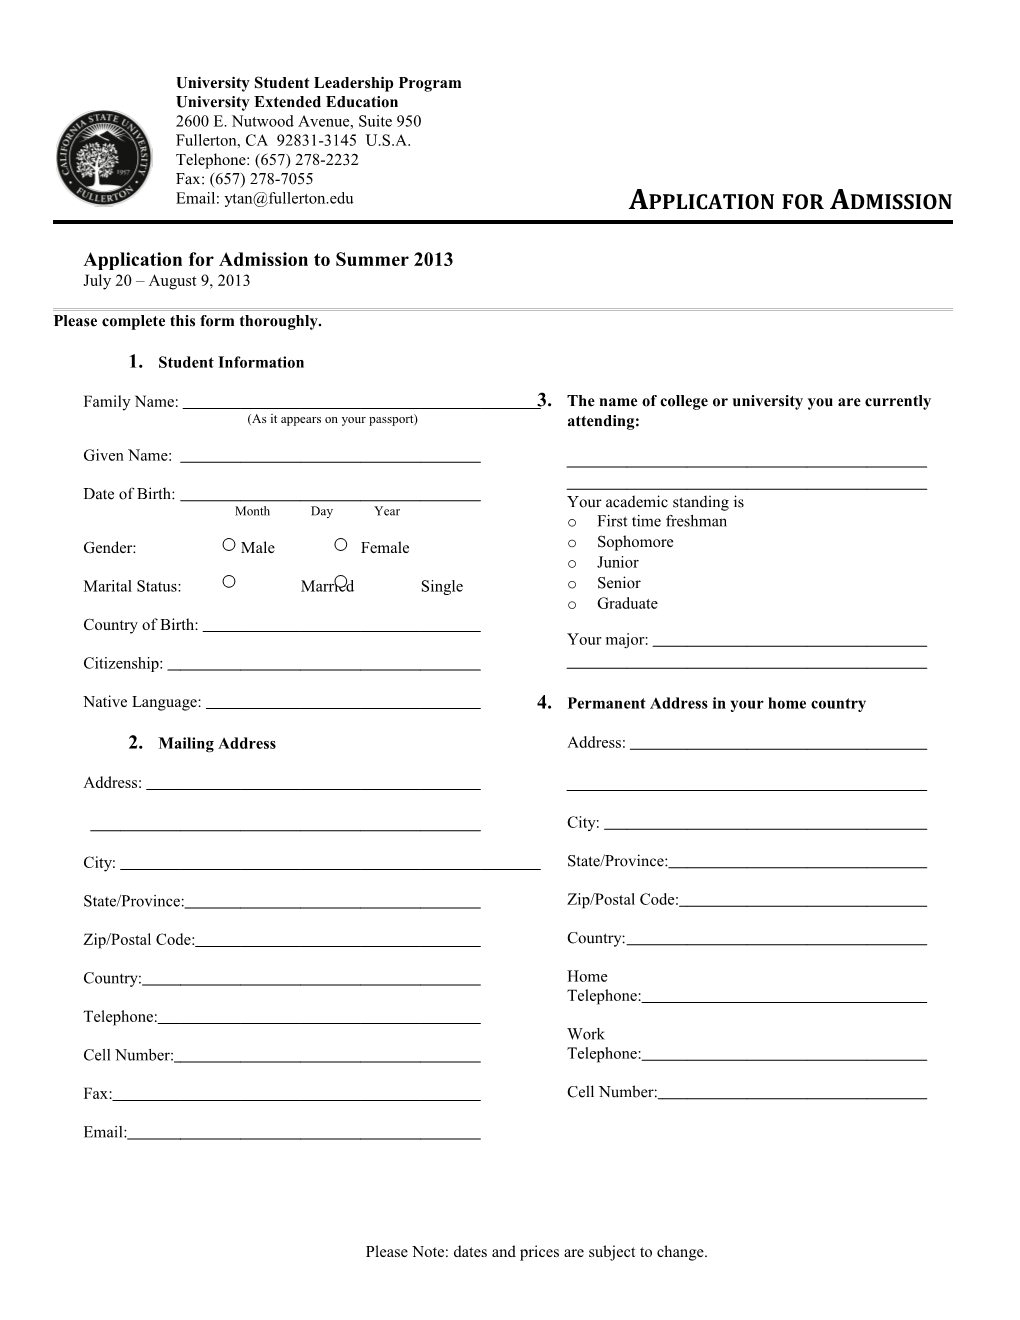 Application for Admission to Summer 2013